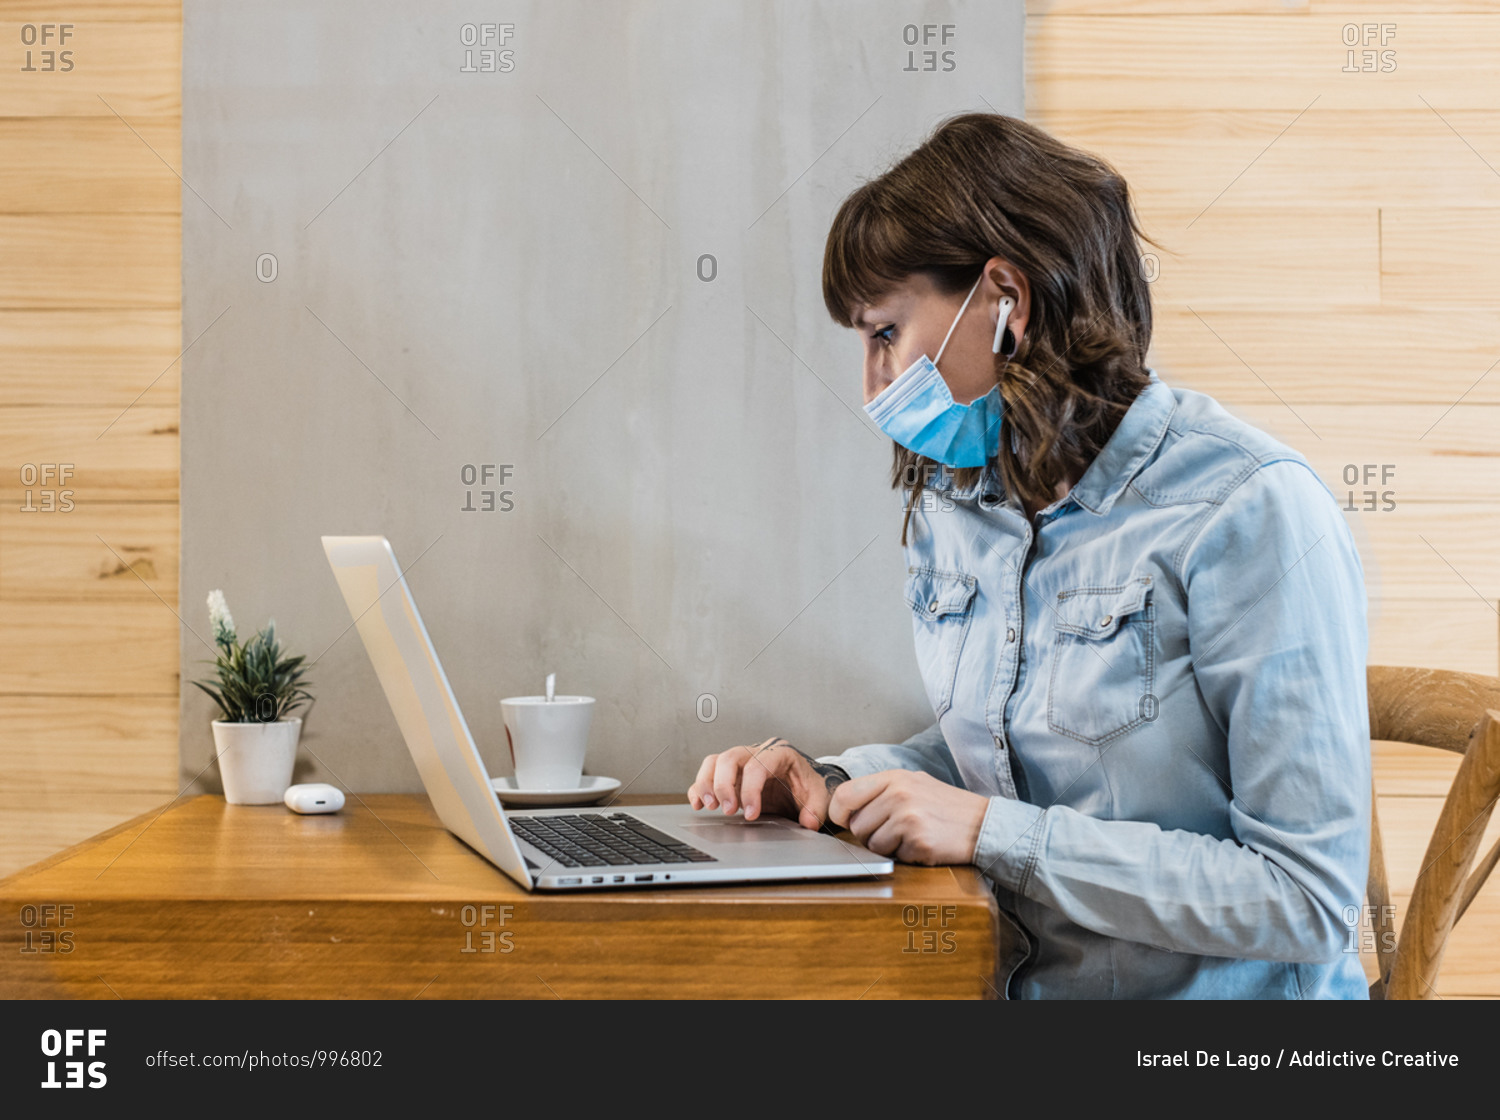 Focused female freelancer in denim shirt and medical mask using earbuds and working remotely in cafe using laptop during coronavirus epidemic